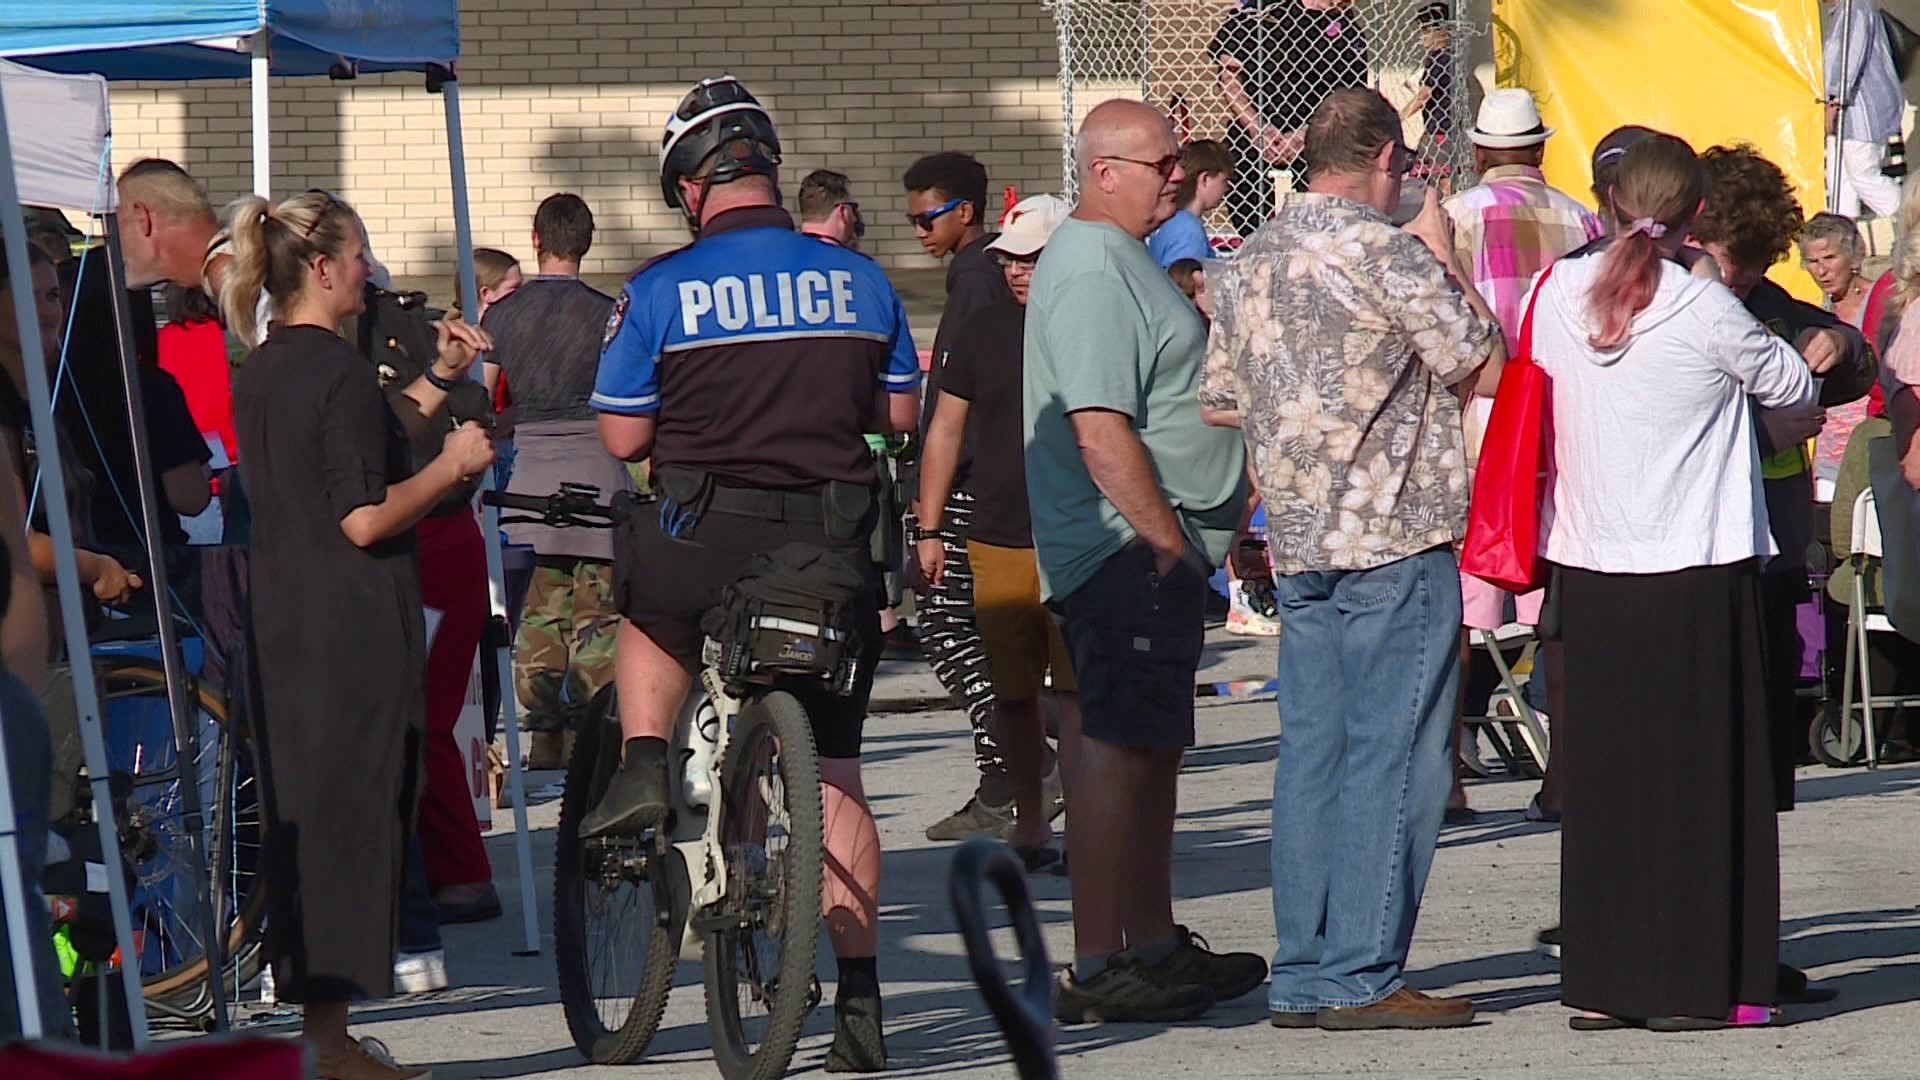 Free food and fun in Fort Smith as police held their National Night Out event.